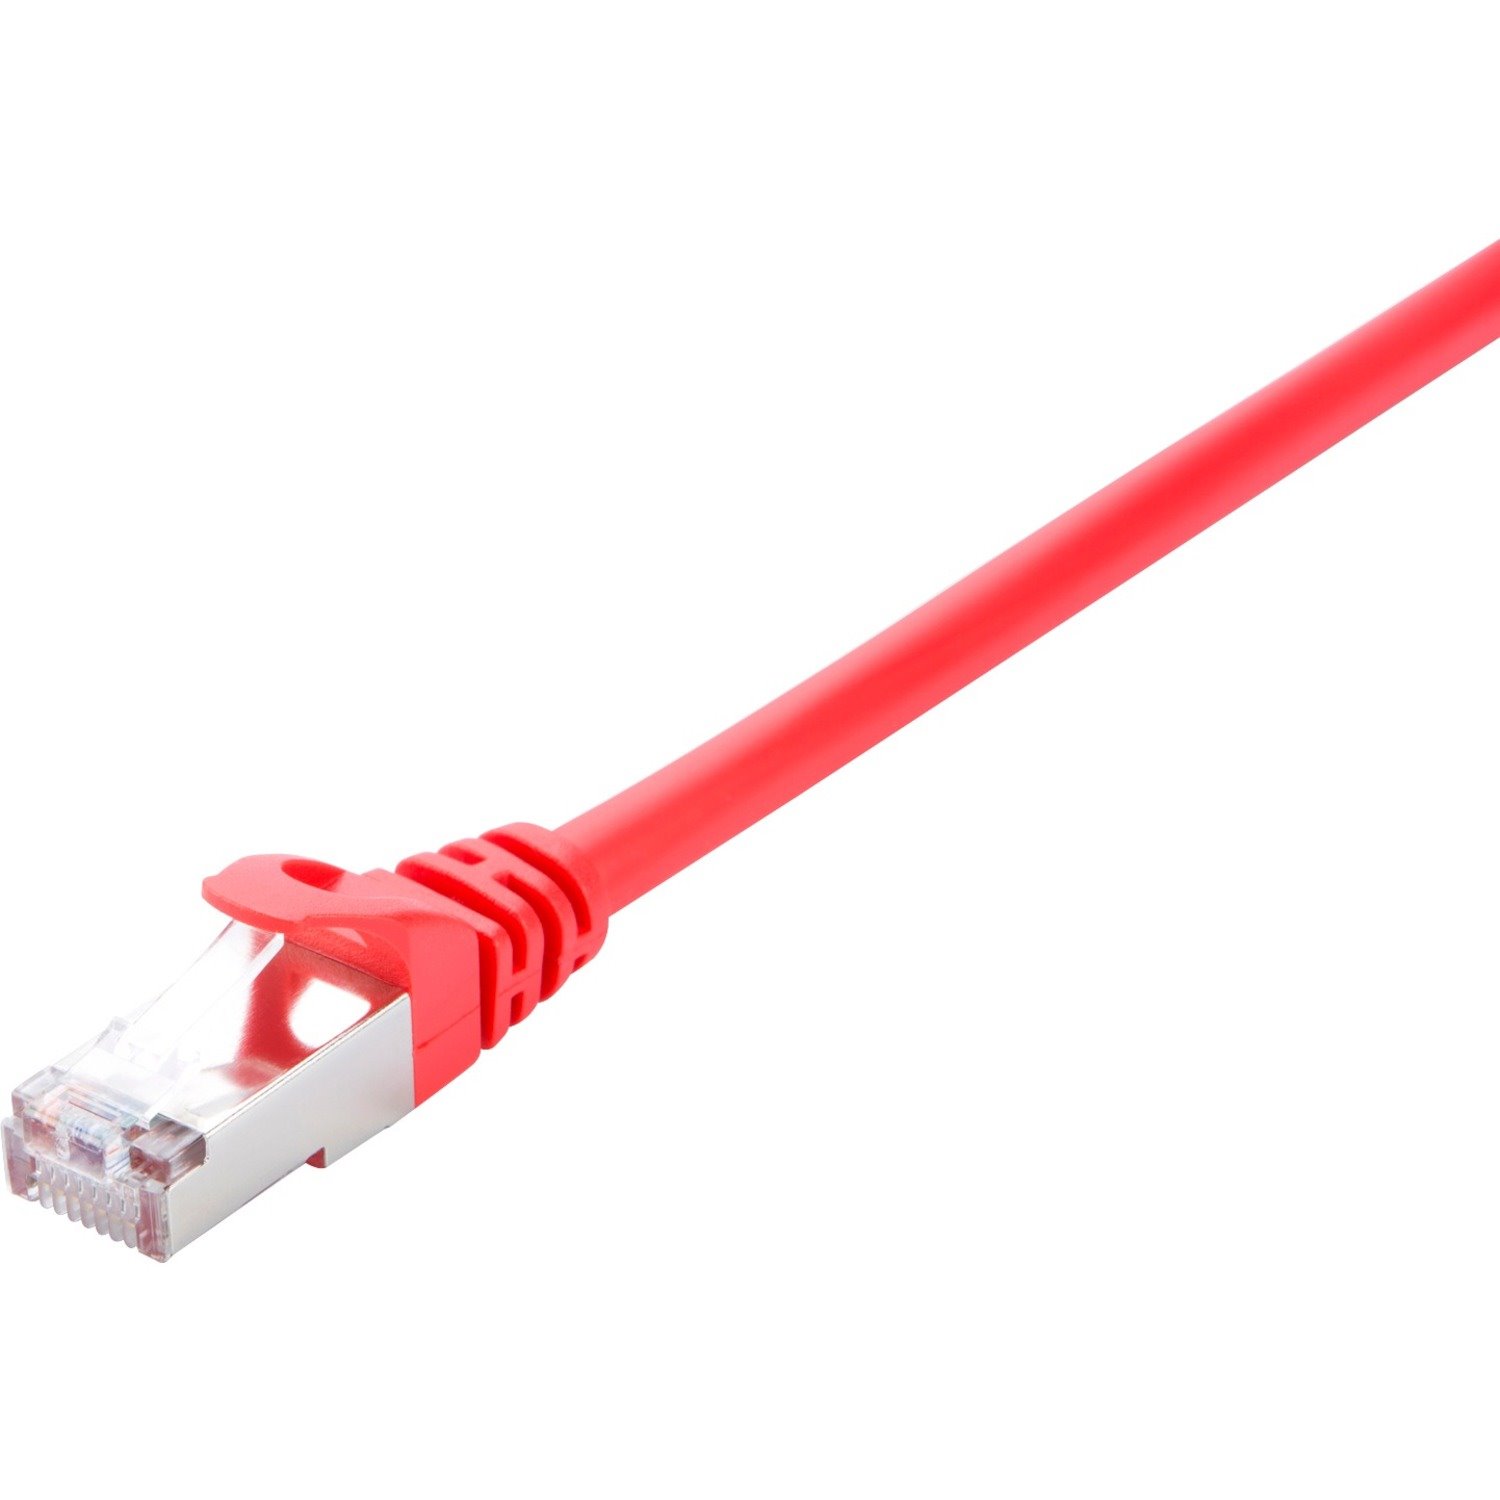 V7 Red Cat6 Shielded (STP) Cable RJ45 Male to RJ45 Male 1m 3.3ft